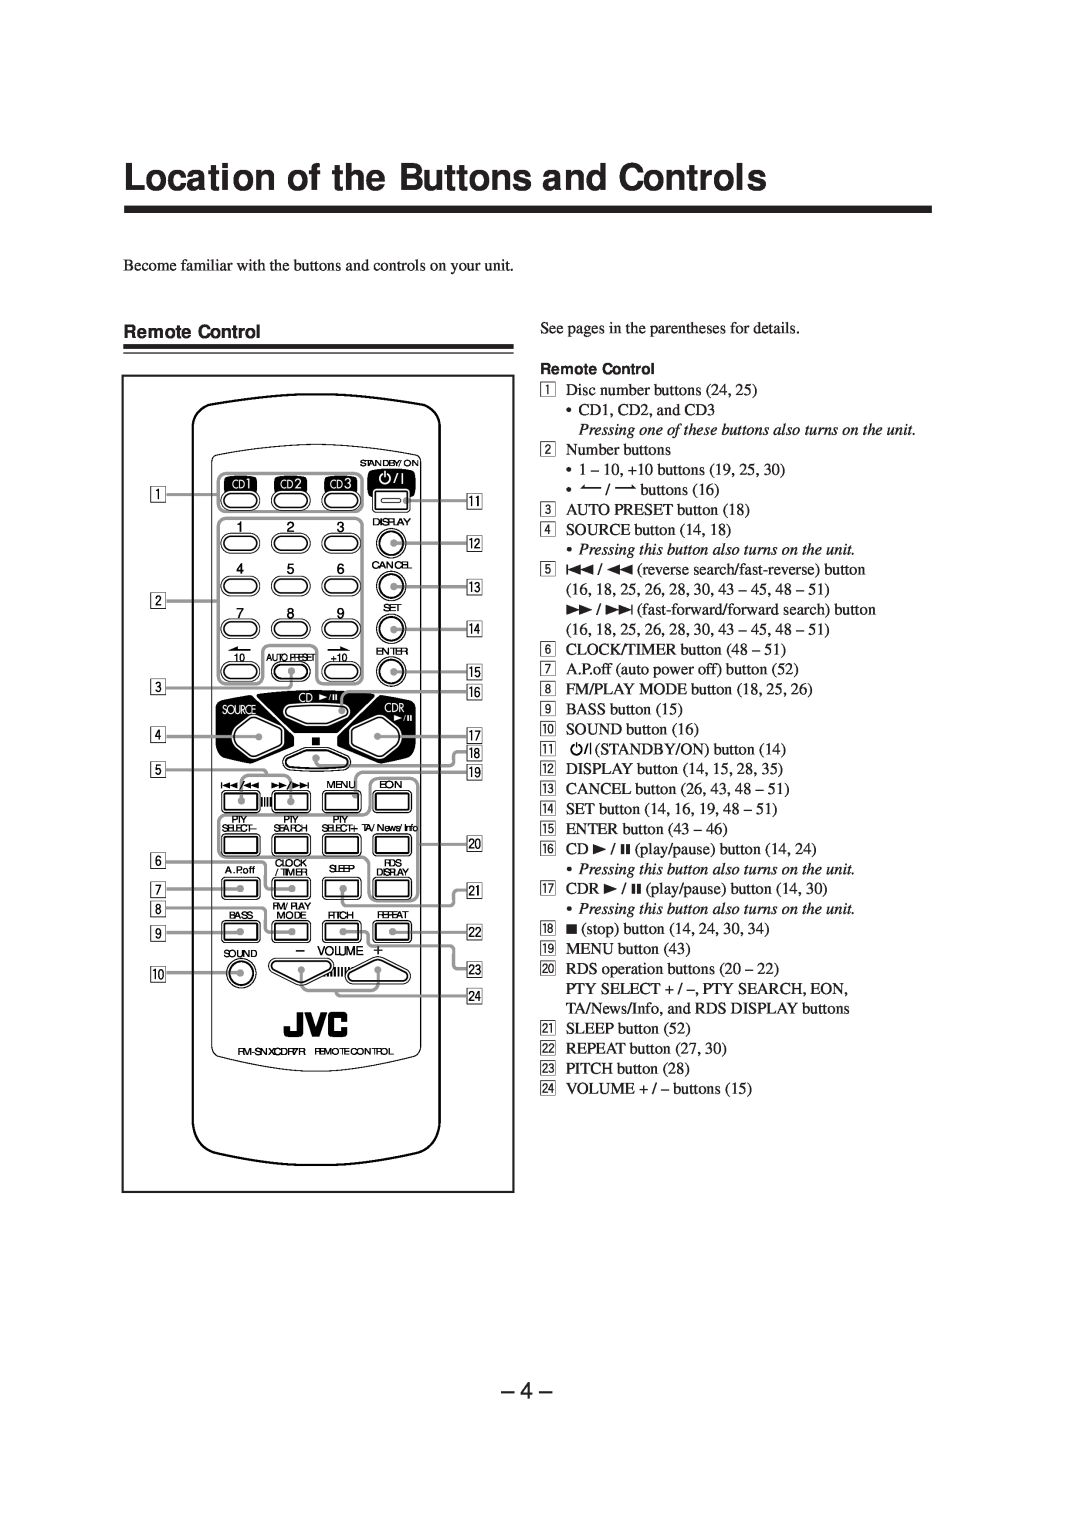 JVC CA-NXCDR7R, LVT0749-003A manual Location of the Buttons and Controls, Remote Control 